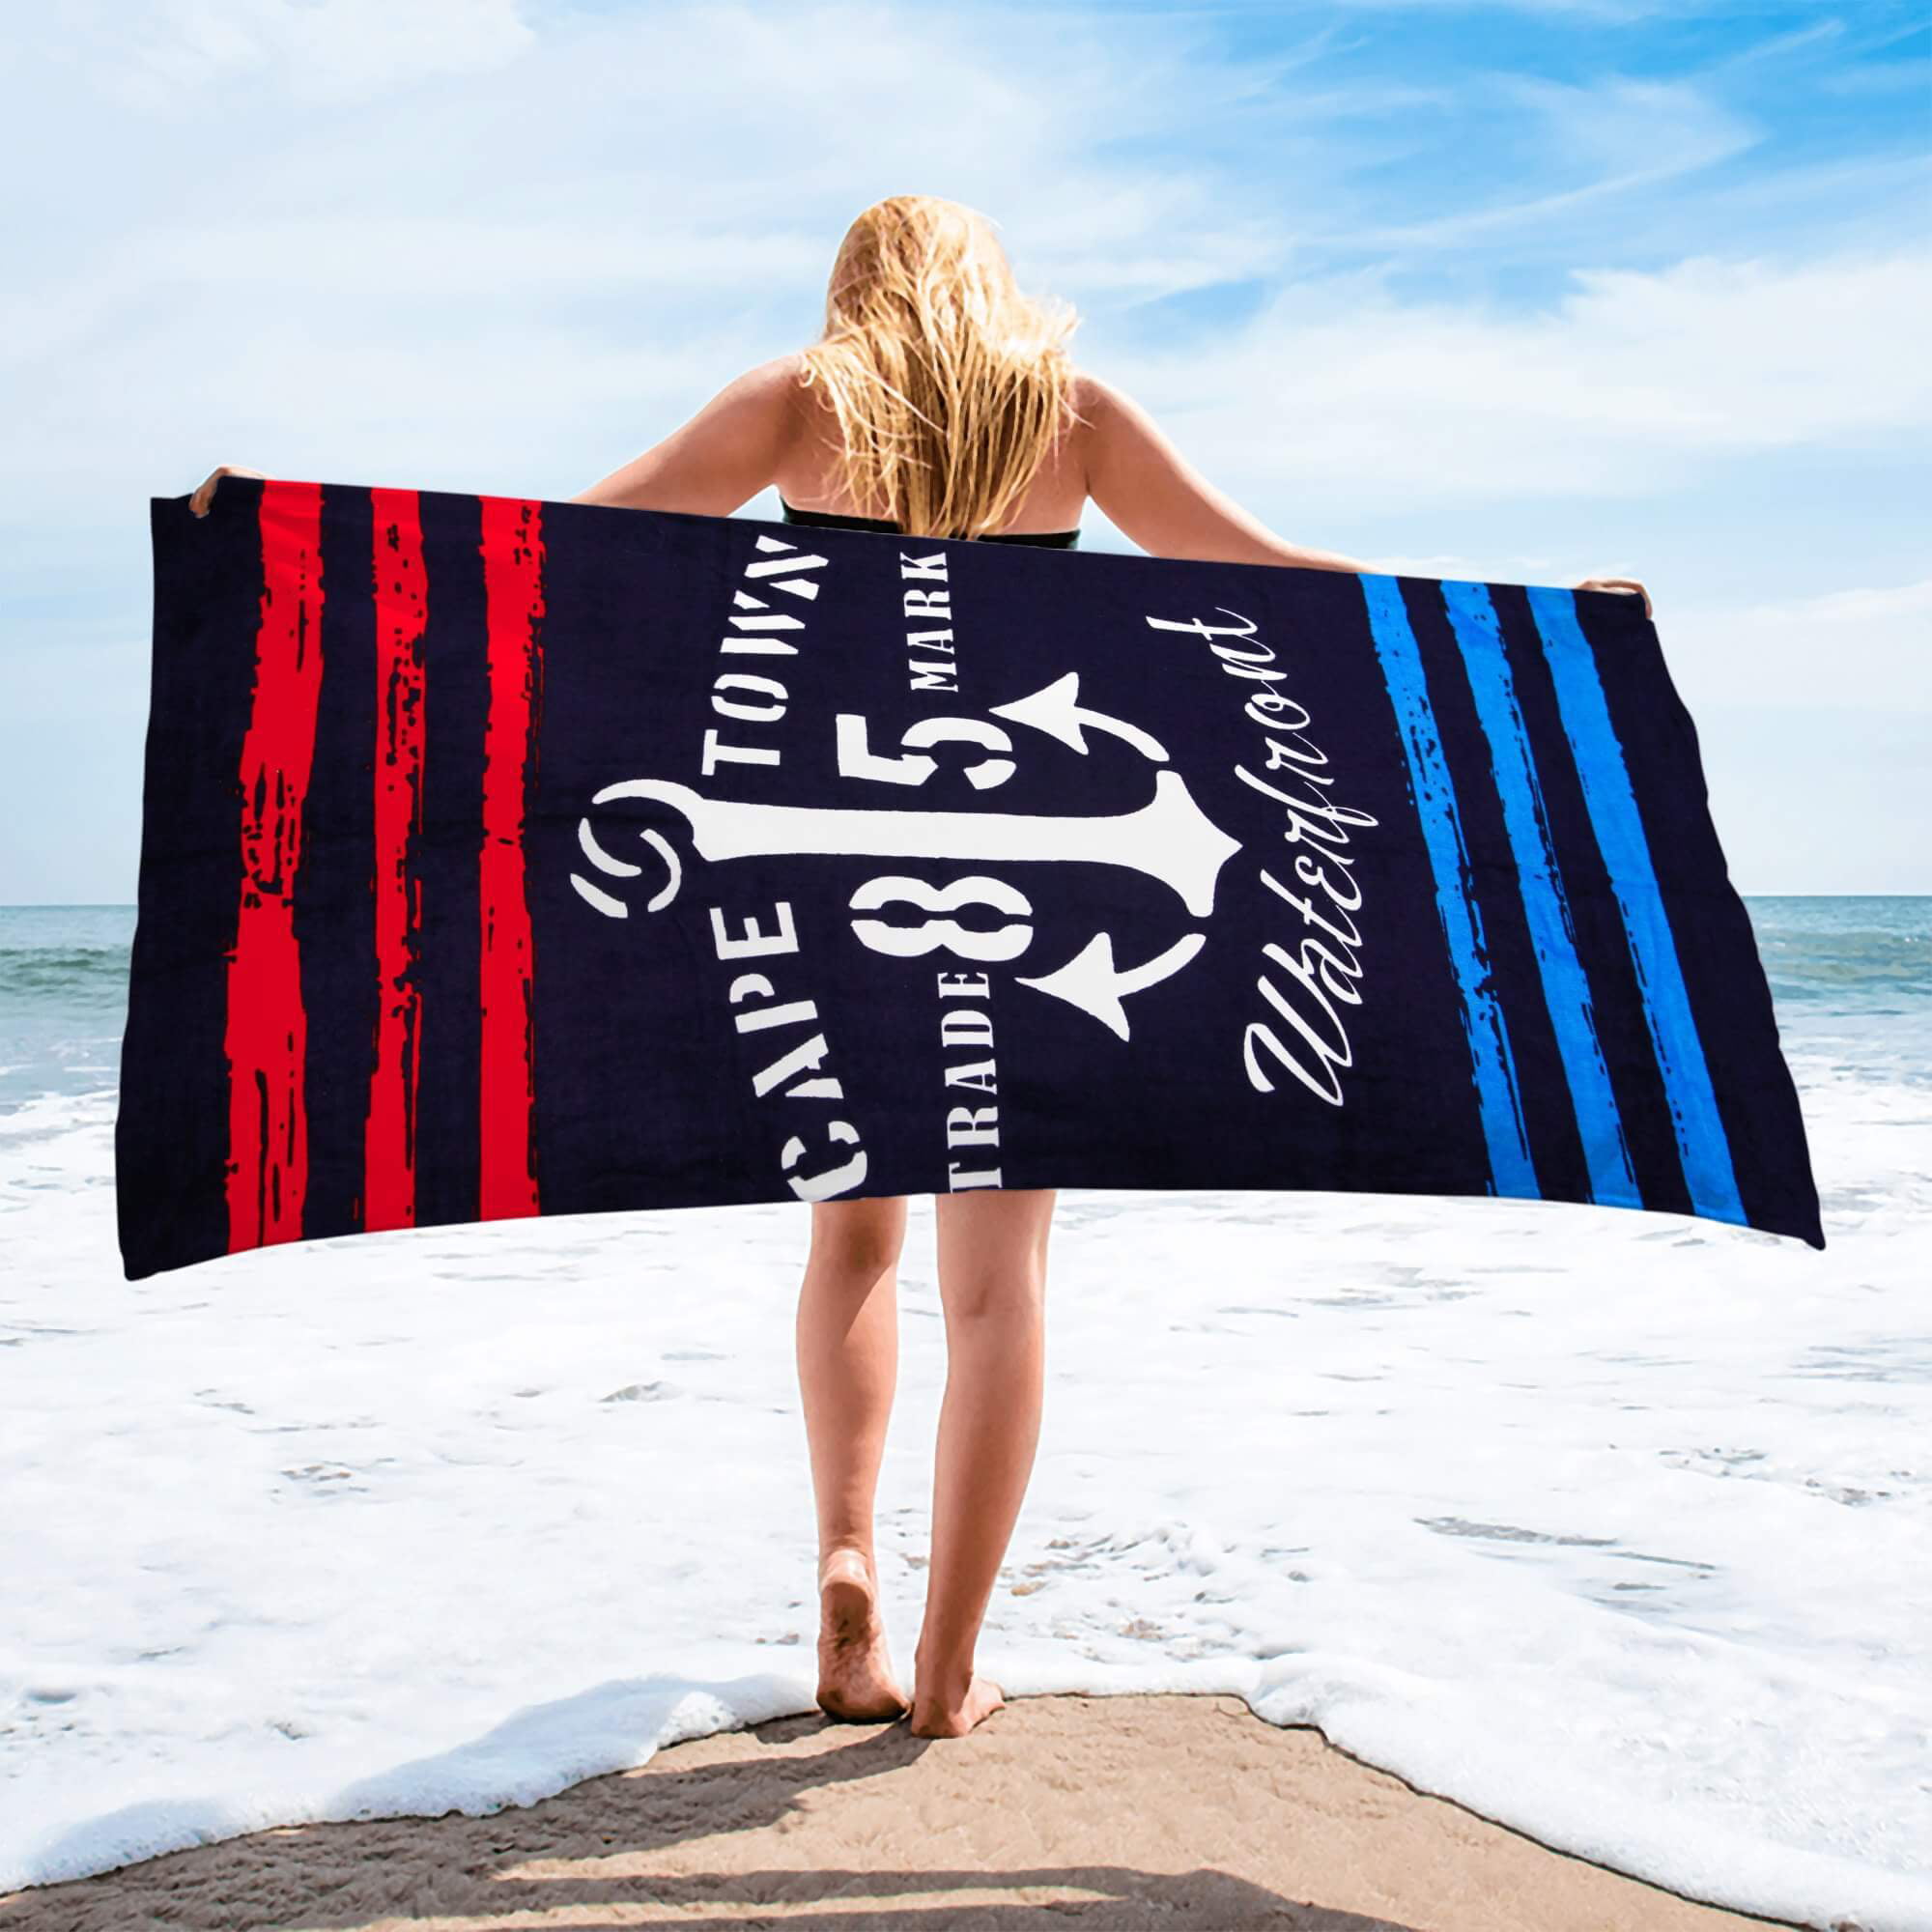 Anchors Nautical Beach Towel 100% Cotton Quick Dry 30x60 Bath Towel by Hencely 